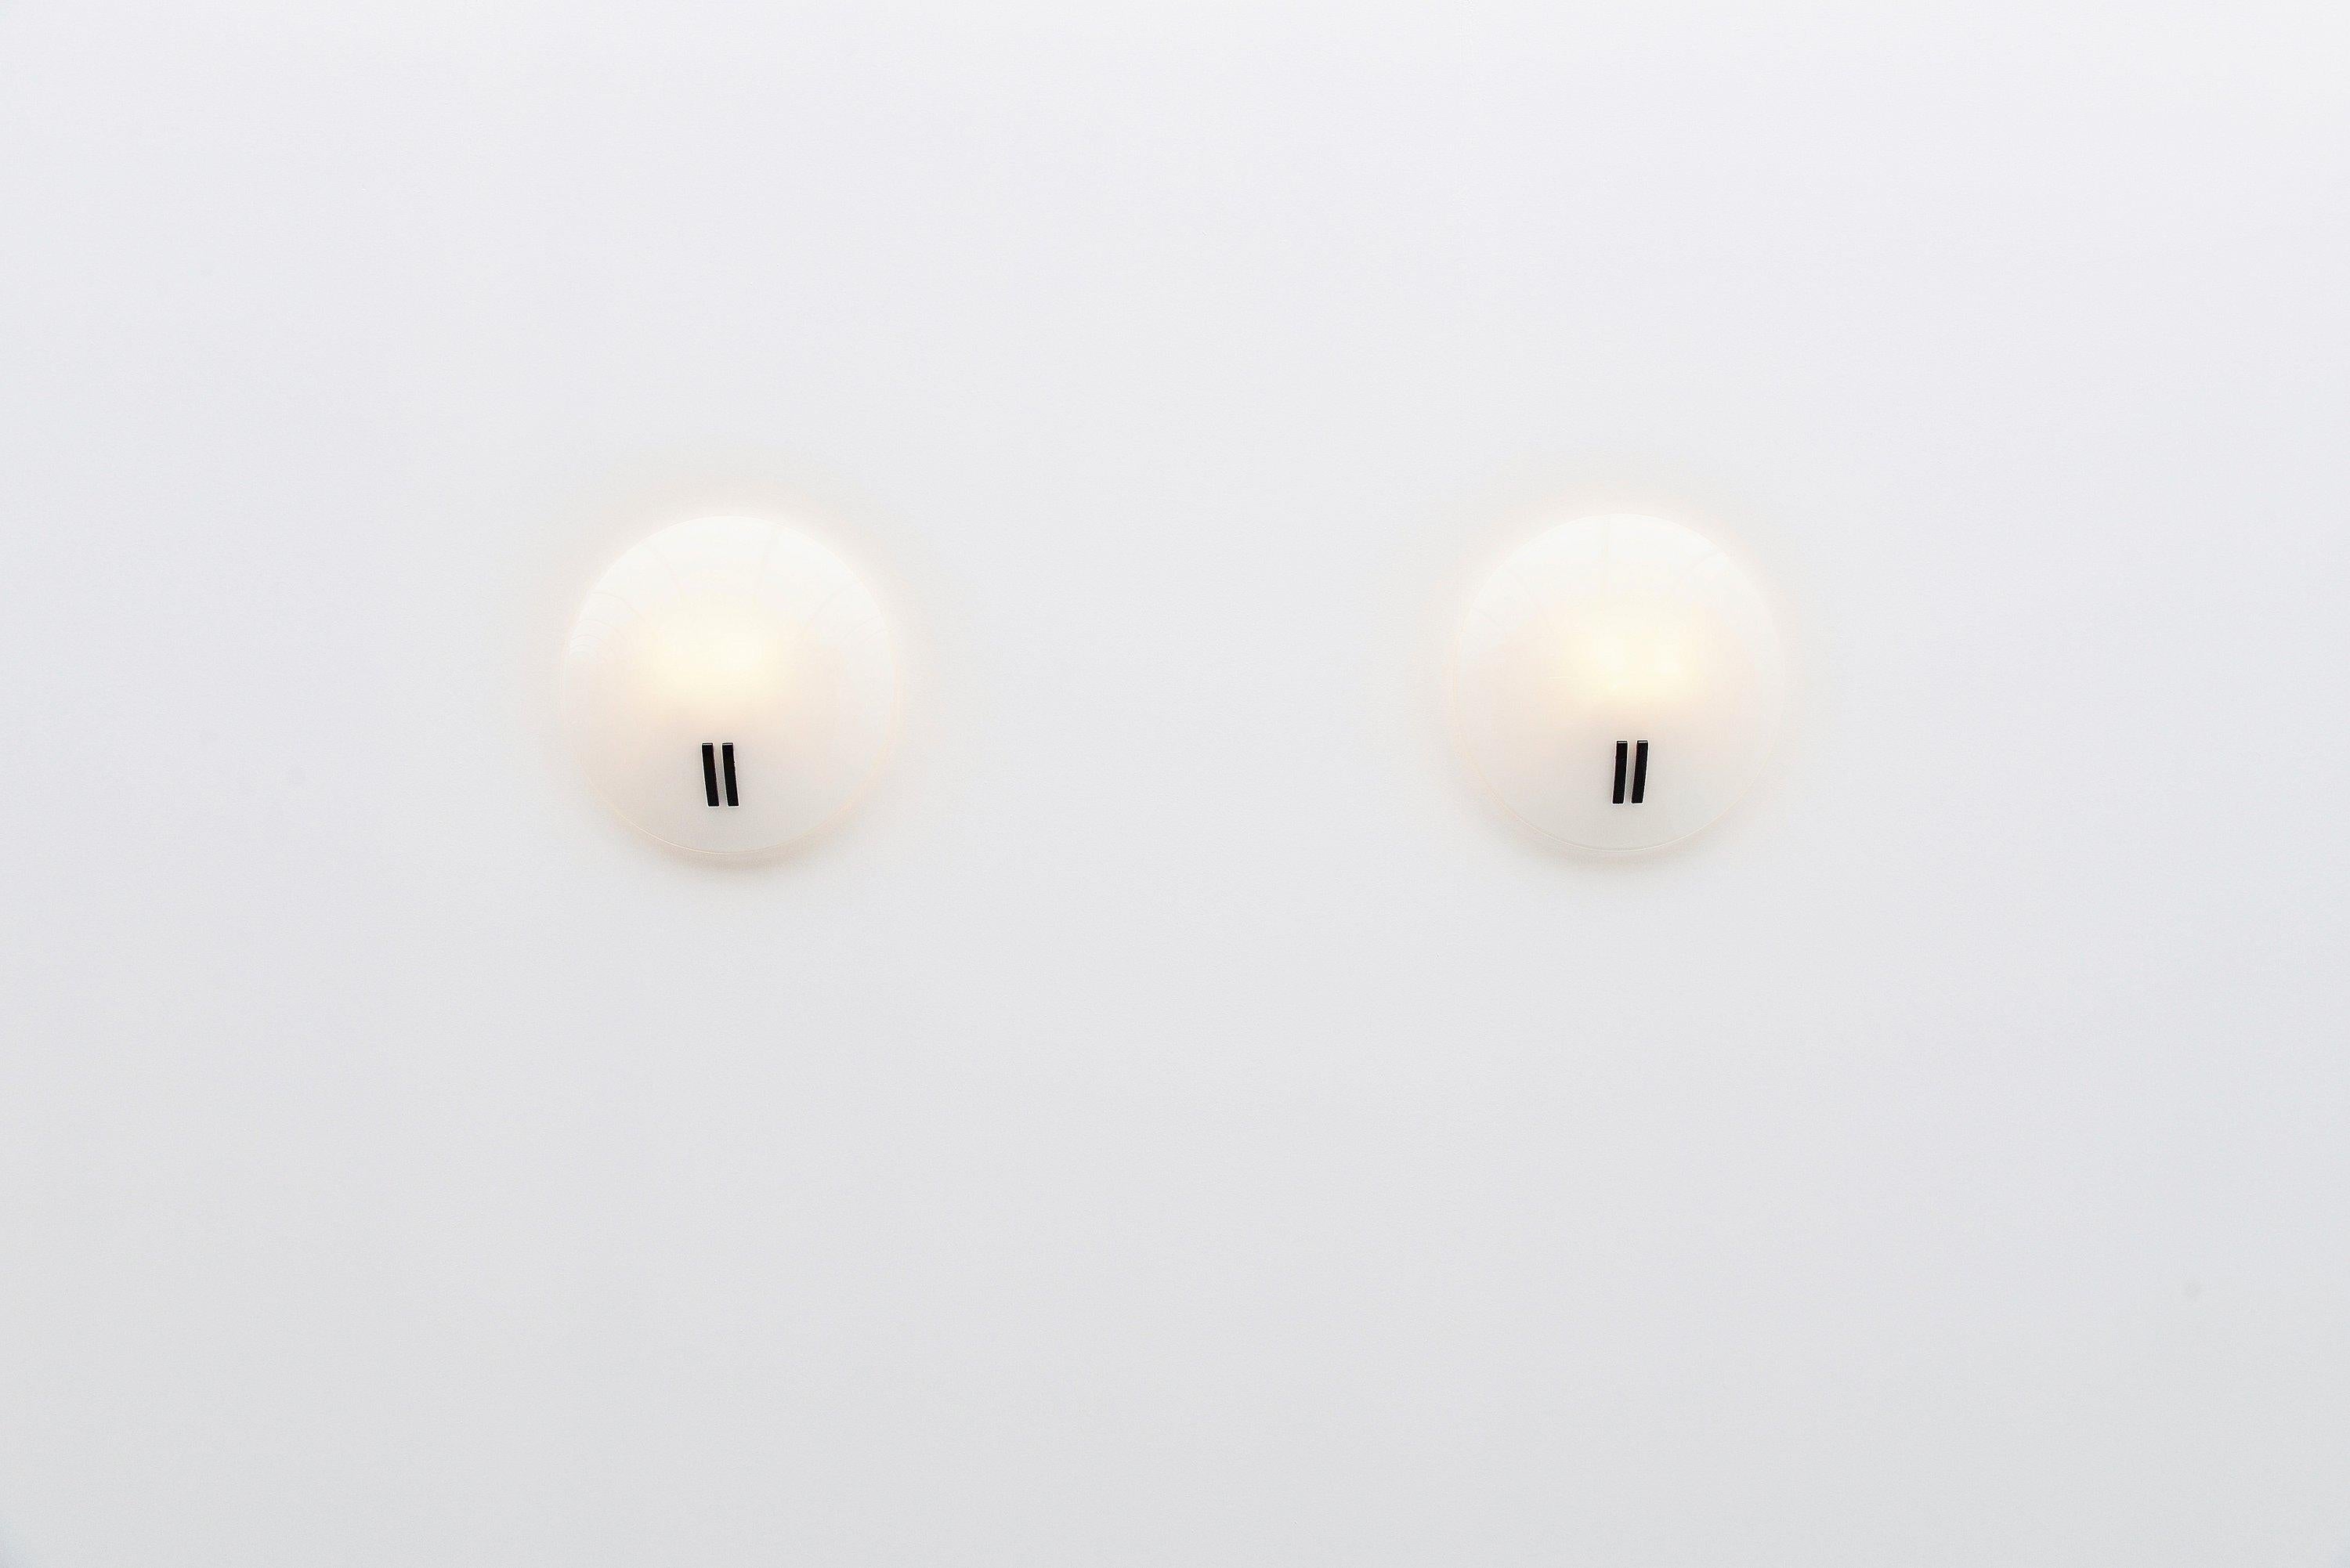 Large pair of wall lamps designed by Bruno Gecchelin and manufactured by Oluce, Italy, 1986. These lamps come from an old stock and were unused, still in their original box. The lamps have a white painted metal wall plate and a white milk glass